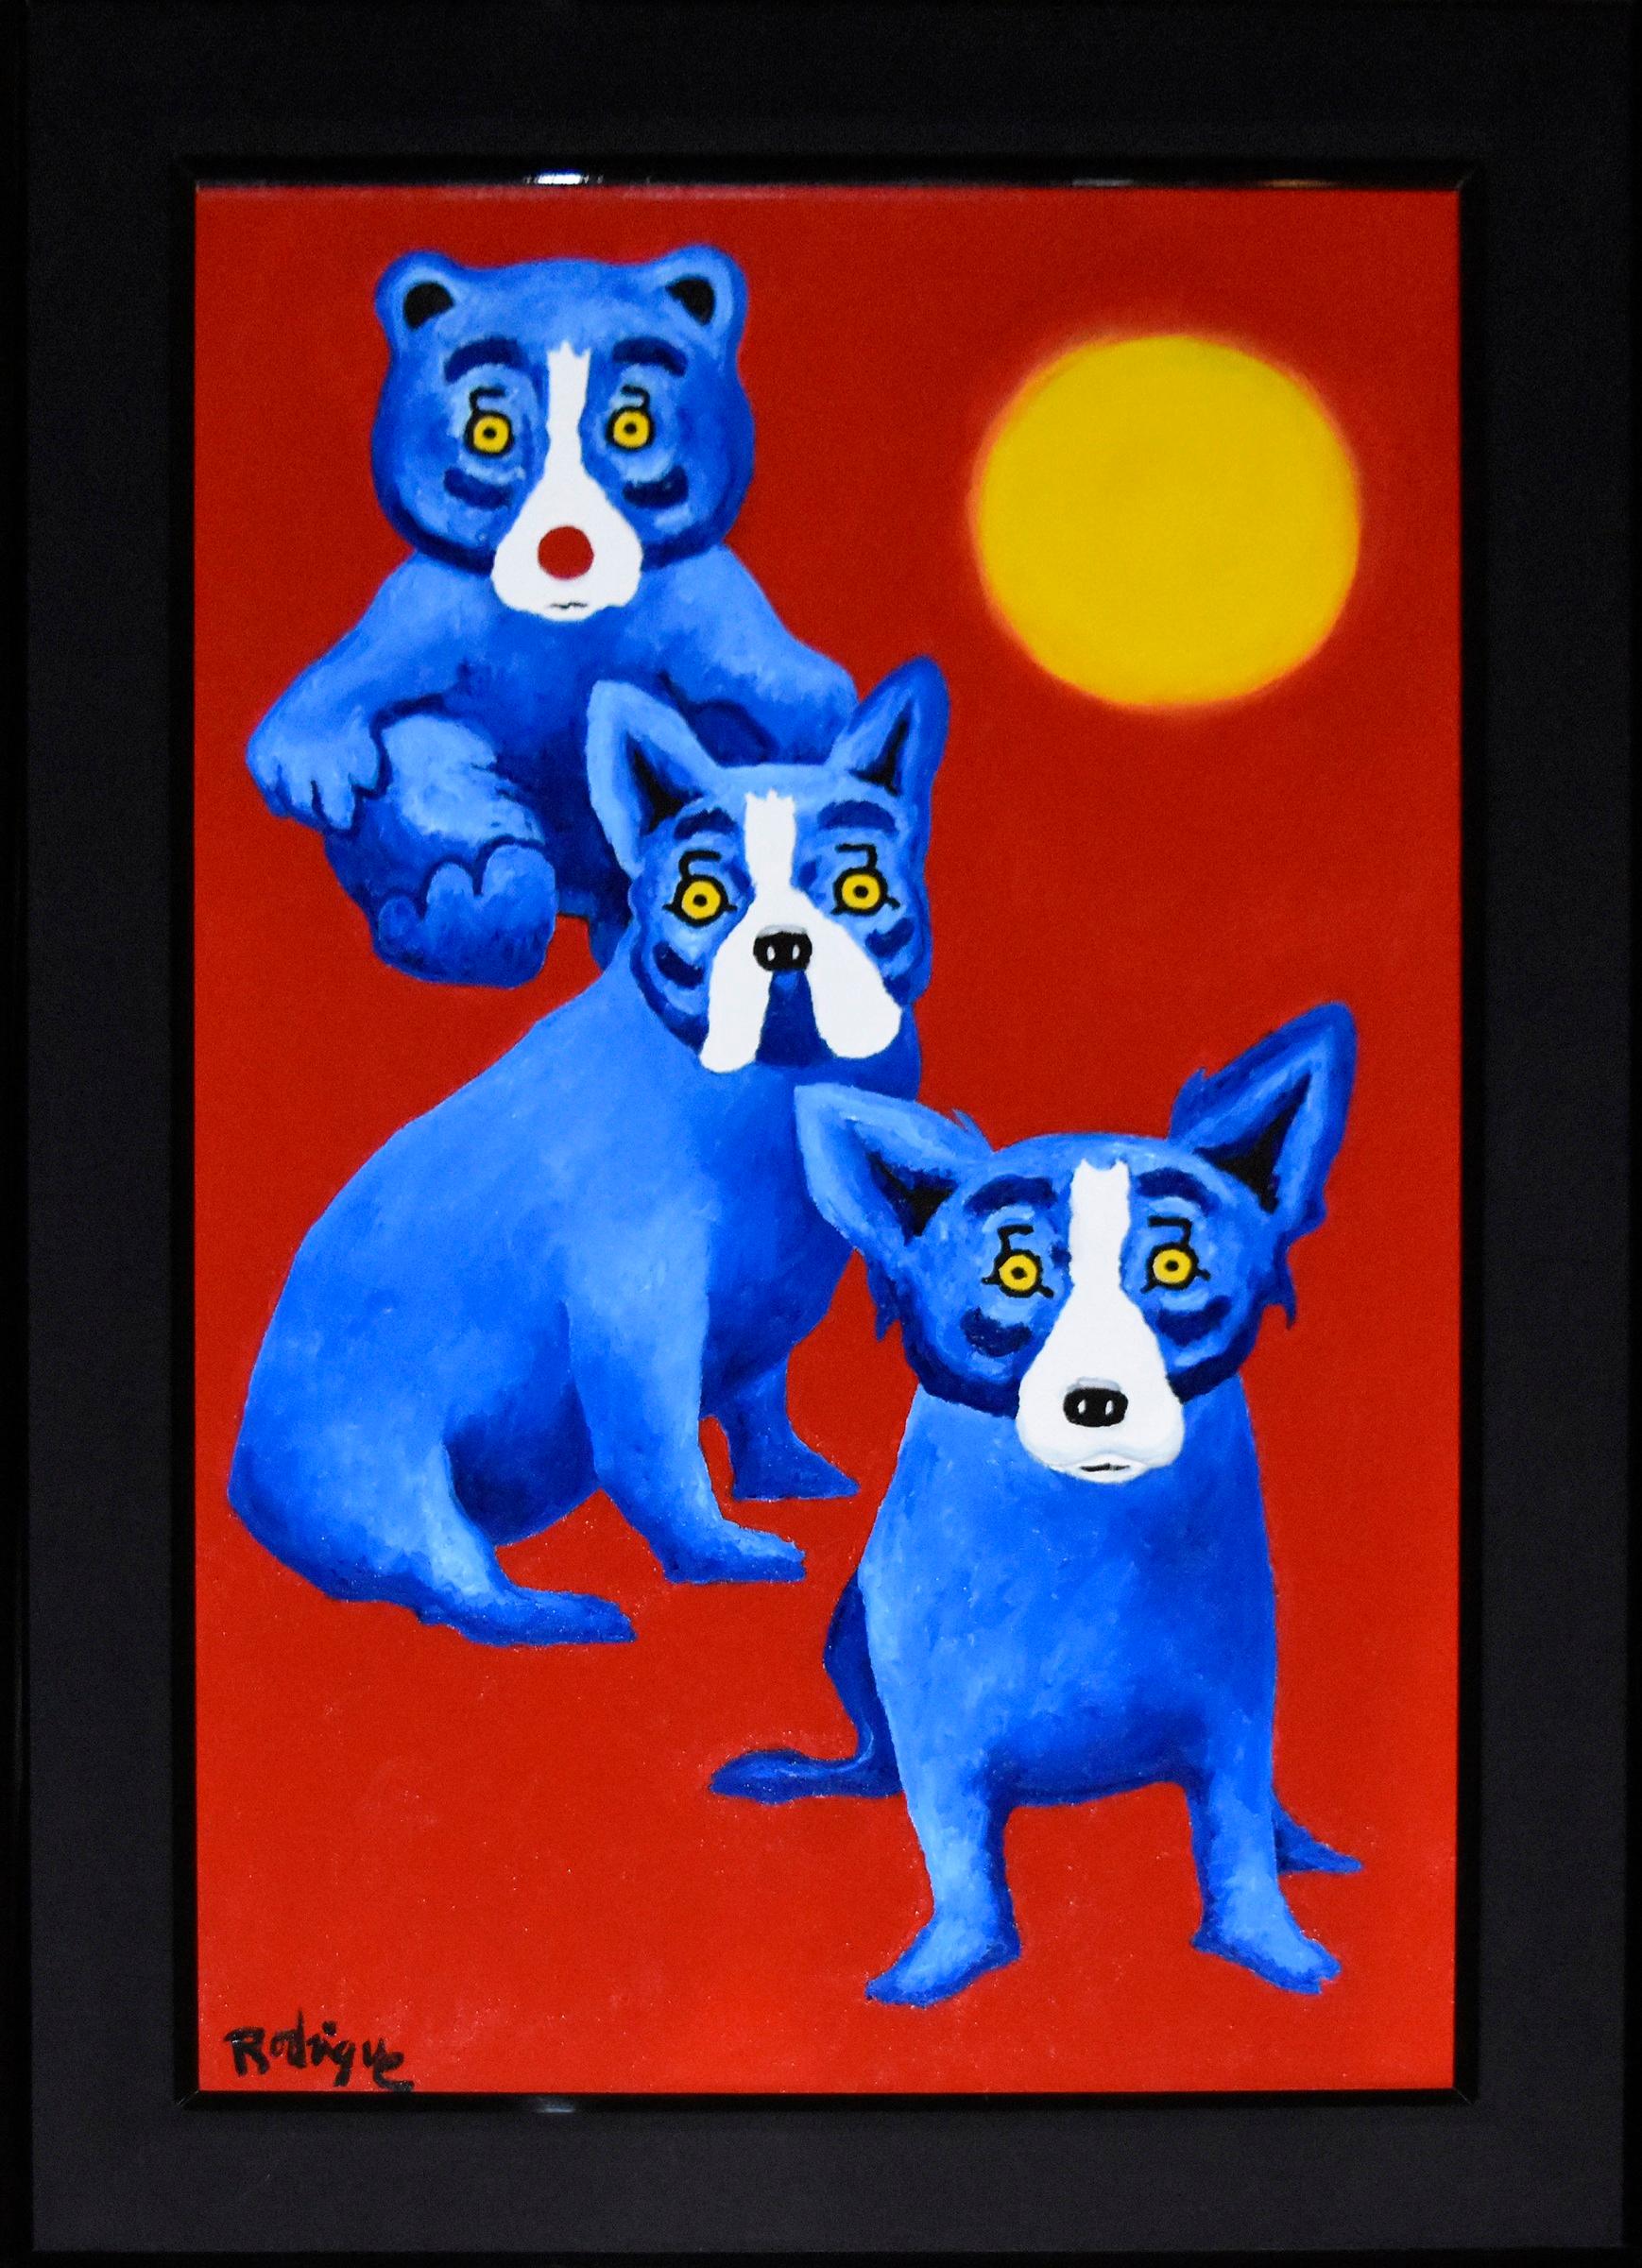 This Blue Dog work consists of a red background with 3 animals, 1 each Boogie Bear, Dudley the dog and Blue Dog.  All the animals have soulful yellow eyes and there is a bright yellow sun in the right corner.  This pop art animal original acrylic on